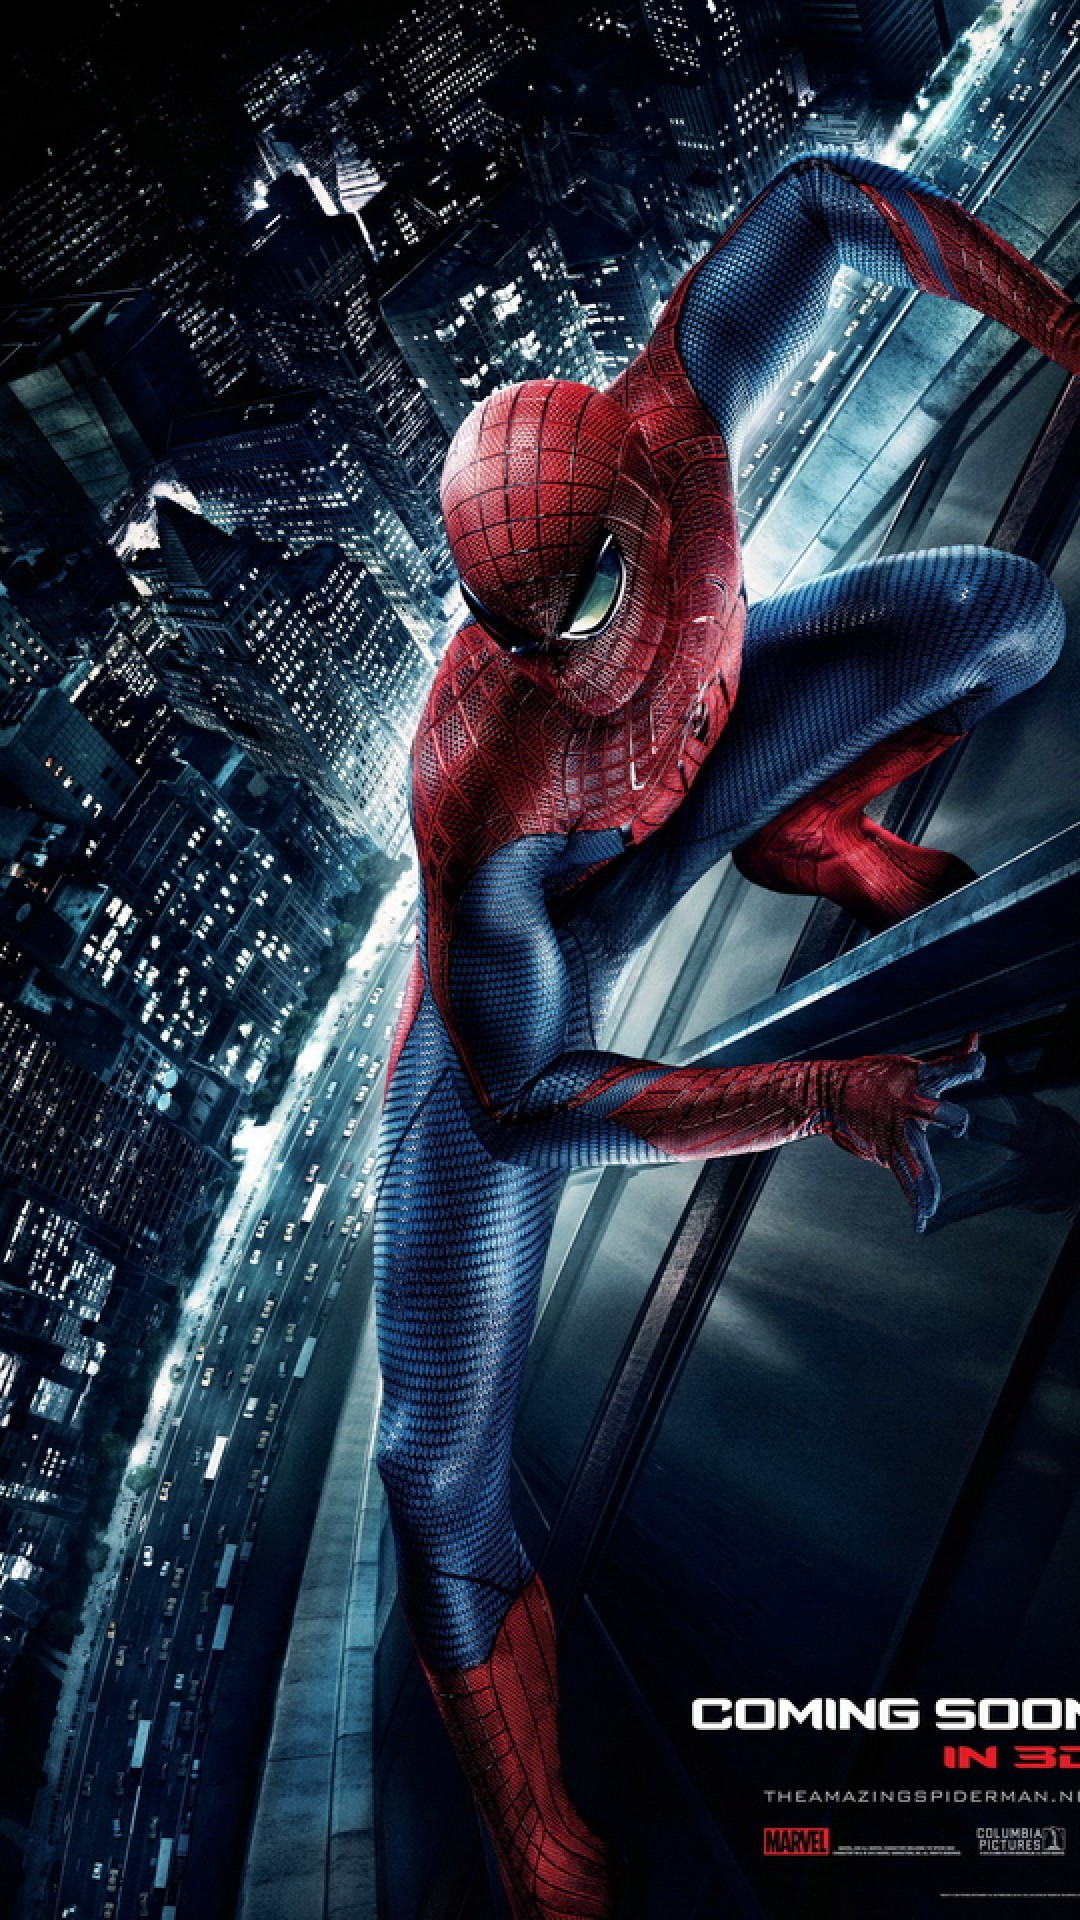 Spiderman 3D Wallpapers Group 67